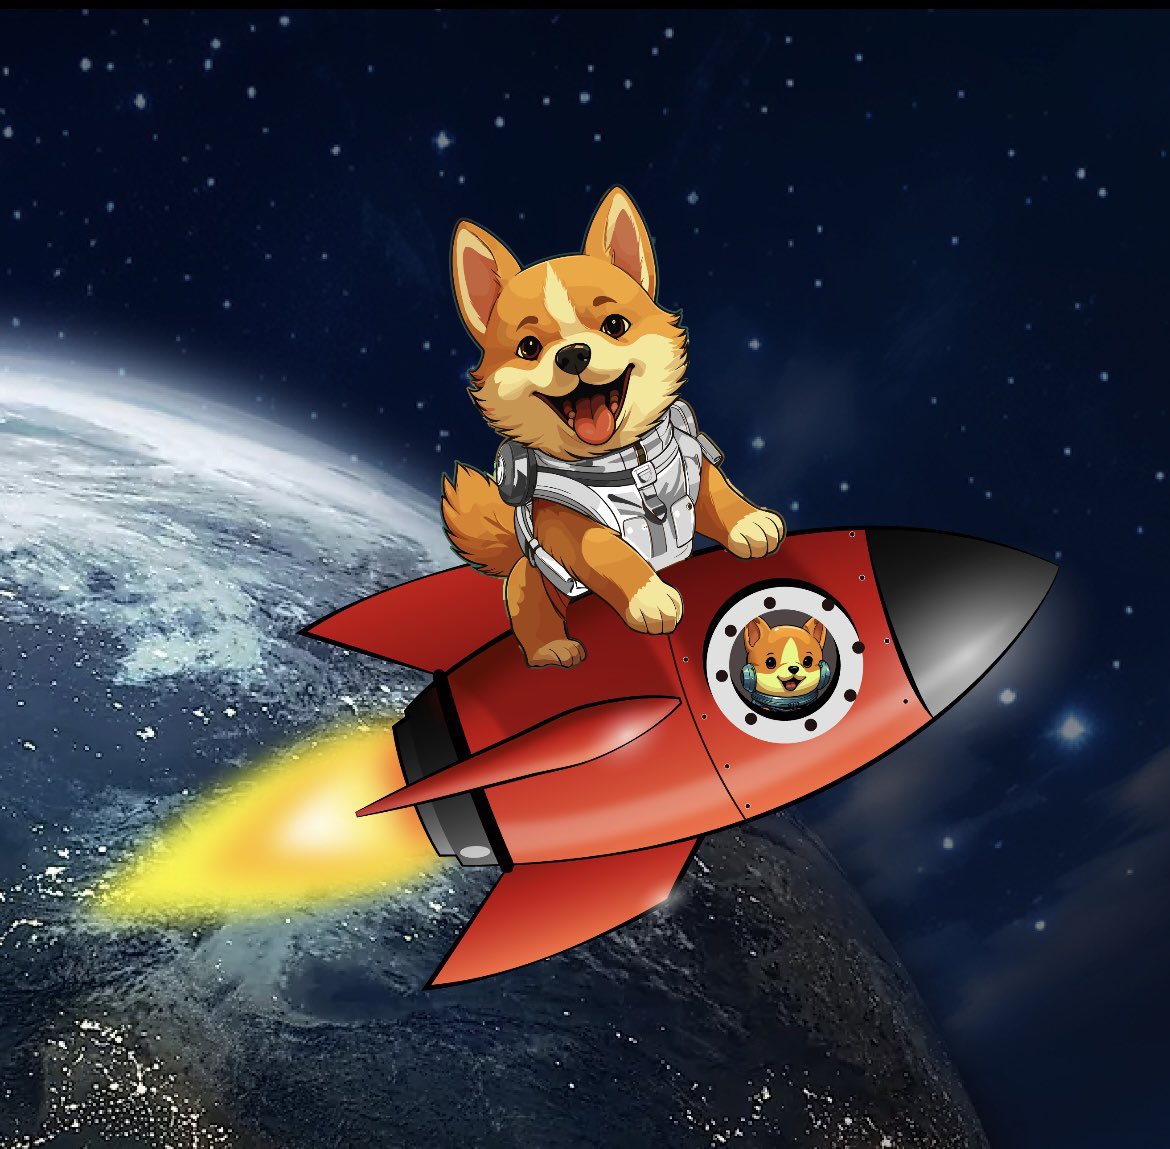 Hey #TheCryptoGems Community ! 🚀 StarshipDoge 🚀 The new Gem of Memeseason Contract: 0x67e4cfd91e4baa4a6794c7974fec892247b26d3c Deflationary token 🔥 🔥 🔥 Liquidity lock 100 years 4150 Holders Something big incoming 🚀🚀 Buy now before x1000🚀 coinmarketcap.com/currencies/sta……